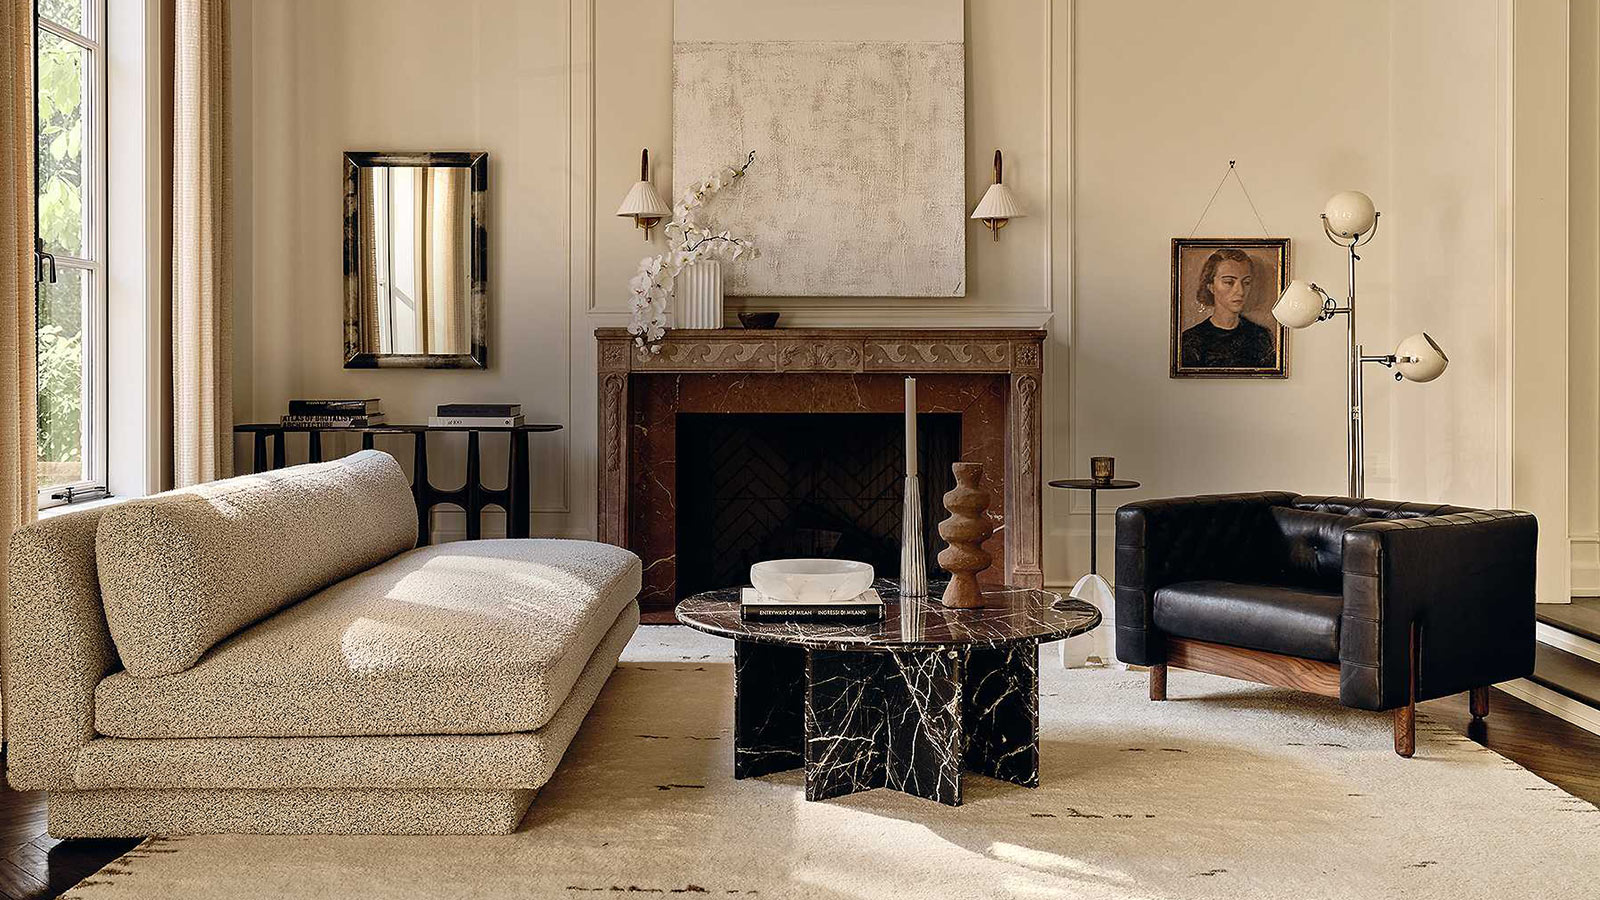 This image presents a well-appointed living room with a classic and sophisticated interior. The room features a high ceiling and paneled walls painted in a light cream color, complemented by floor-length drapes framing a window that lets in natural light. The furnishings include a plush, textured fabric chaise lounge and a dark leather armchair, adding a contrast of textures. A circular marble coffee table with dark veins stands at the center of the room on a large, light-colored area rug. To the right, a metal floor lamp with three globular shades adds a modern touch next to a framed portrait of a woman hanging on the wall. In the center, above an ornate marble fireplace, hangs a large abstract canvas flanked by two classic wall sconces. On the left, a sleek console table holds books, and a rectangular mirror above reflects part of the room.